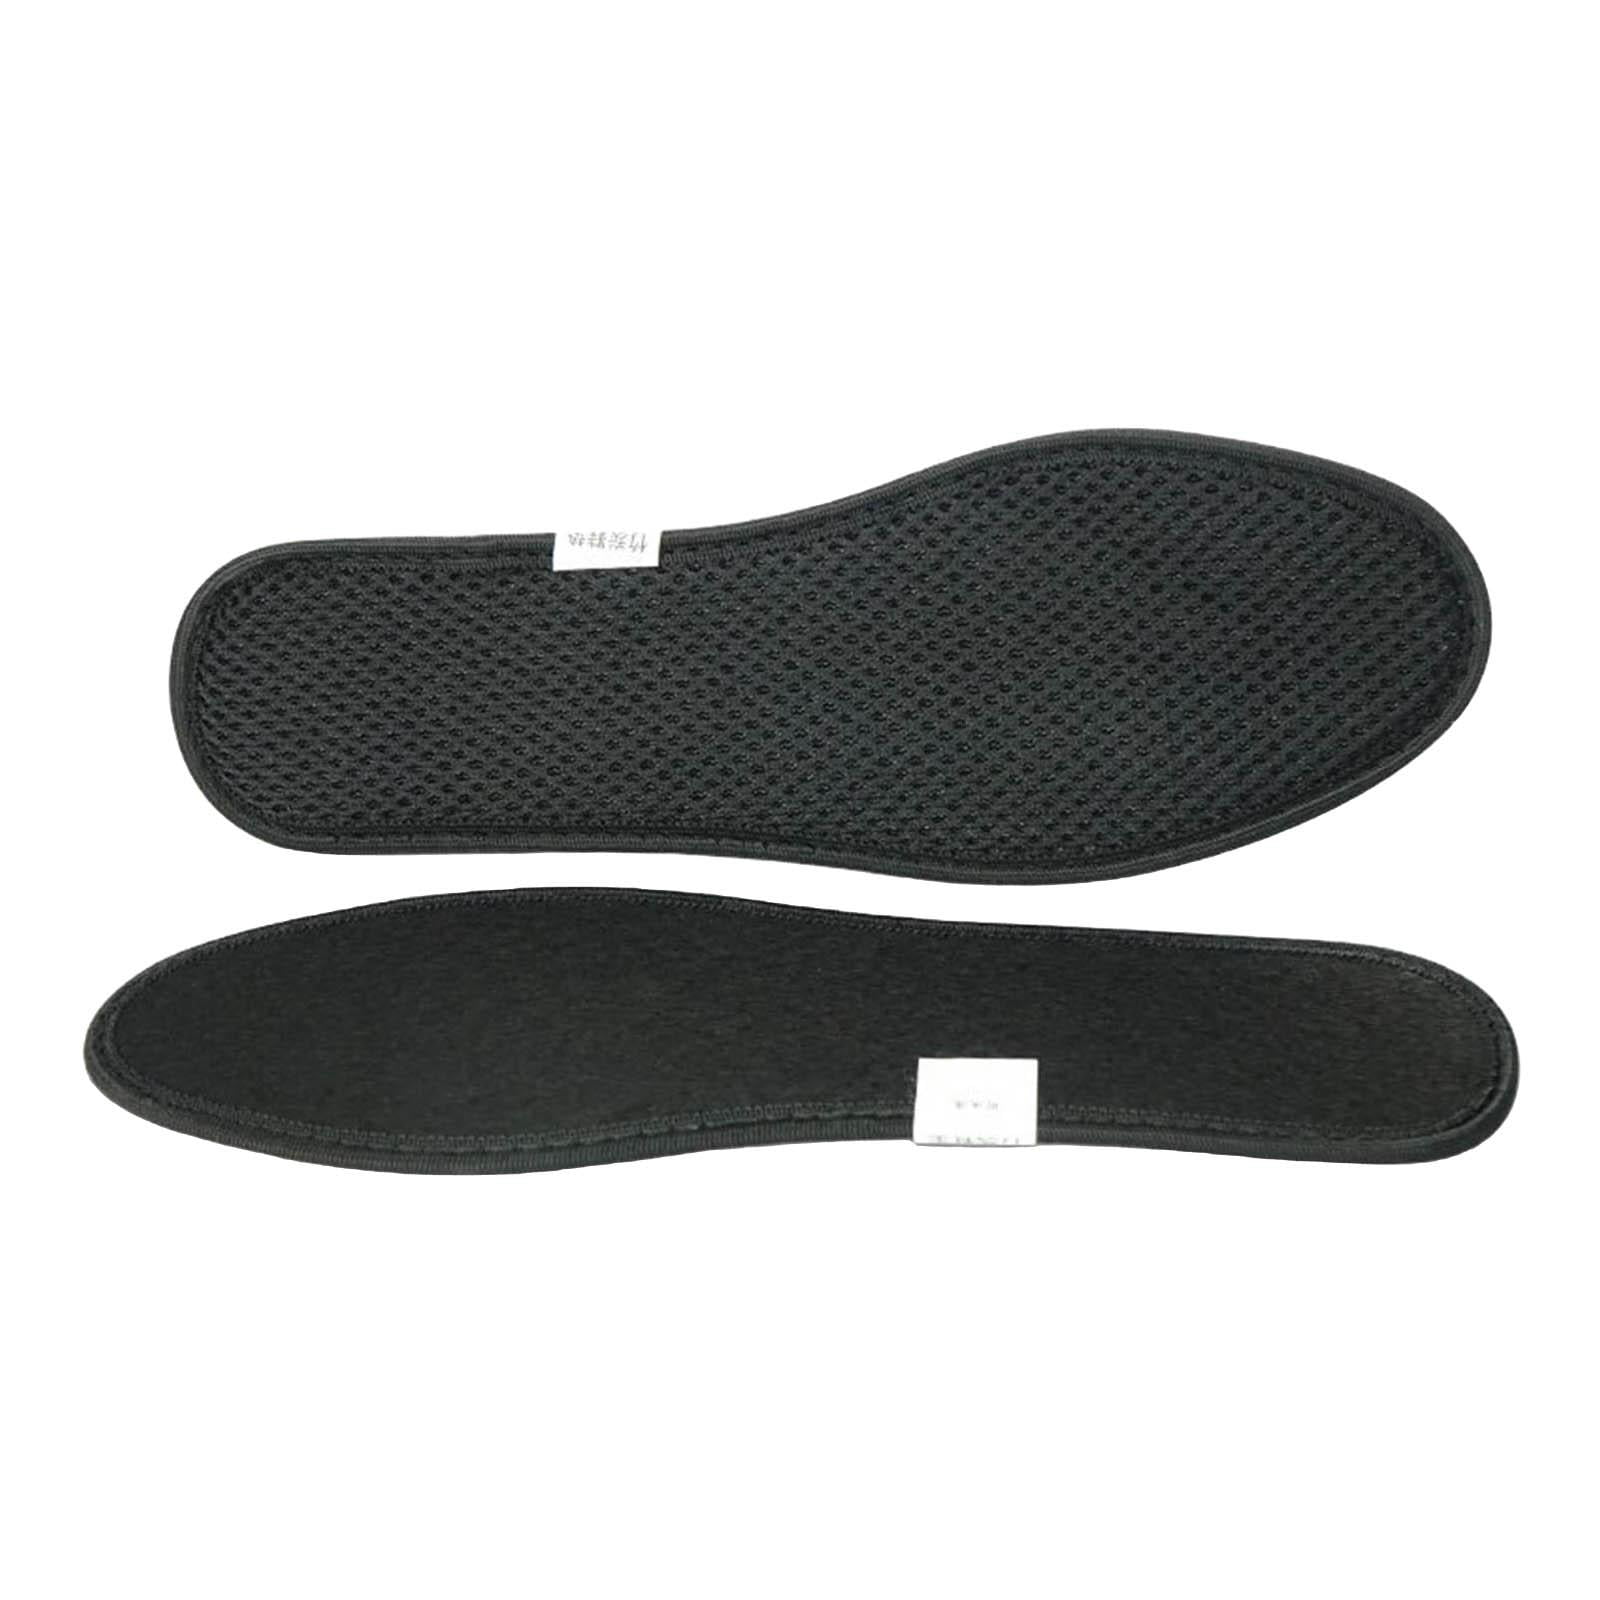 ODOUR EATERS INSOLES FOR UNISEX BOOTS SHOES TRAINERS UK SIZE 5 THESE ARE PRE-CUT 